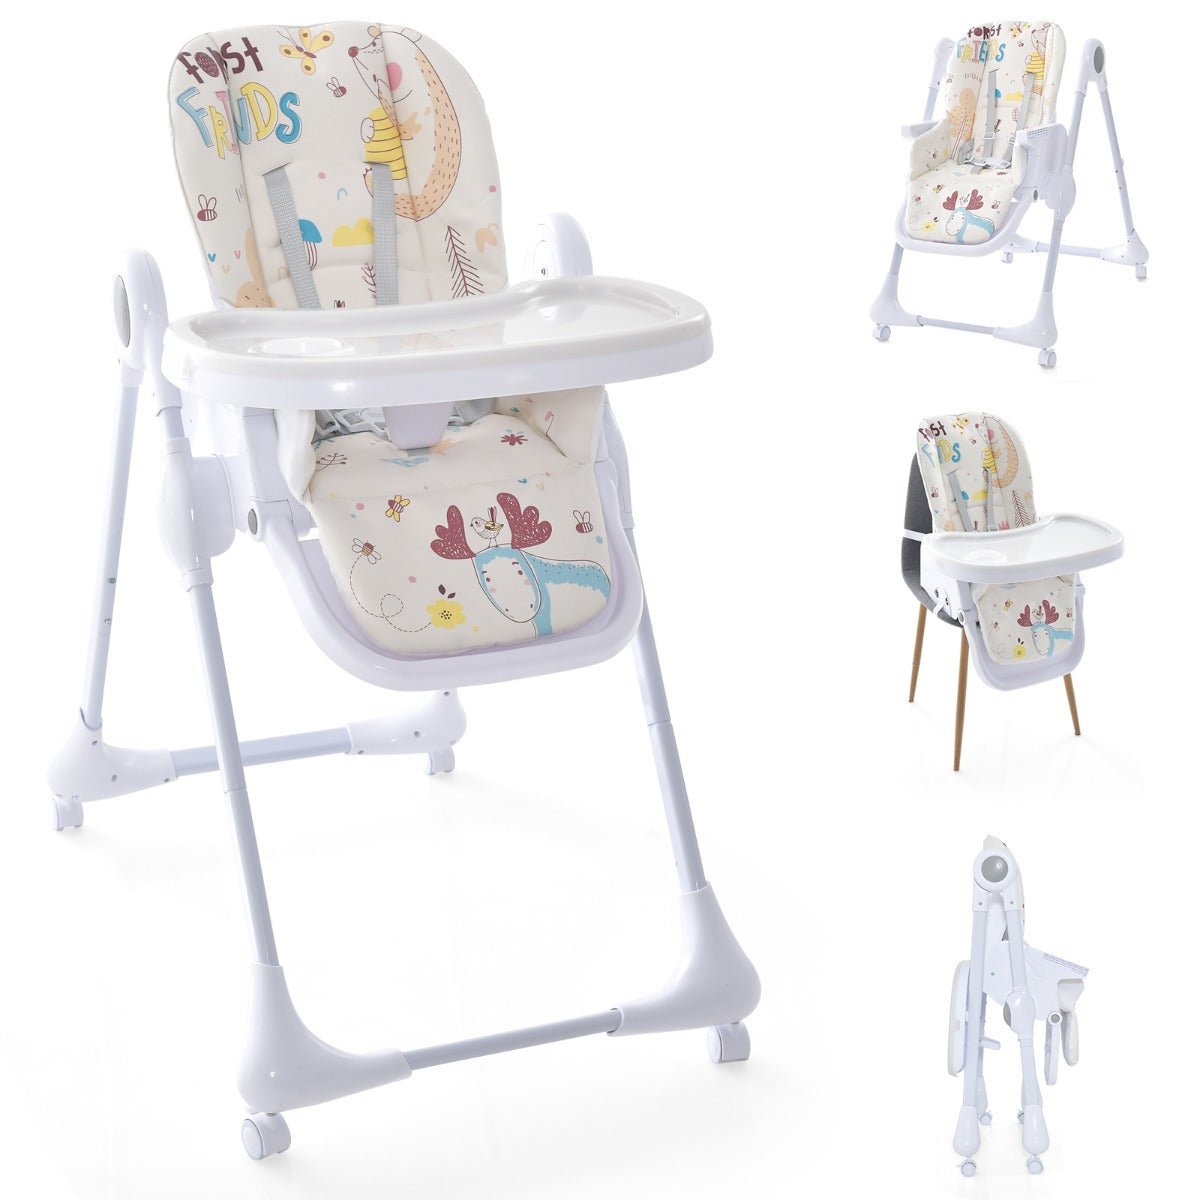 Foldable Infant High Chair with 7-Level Adjustable Height for Baby Beige